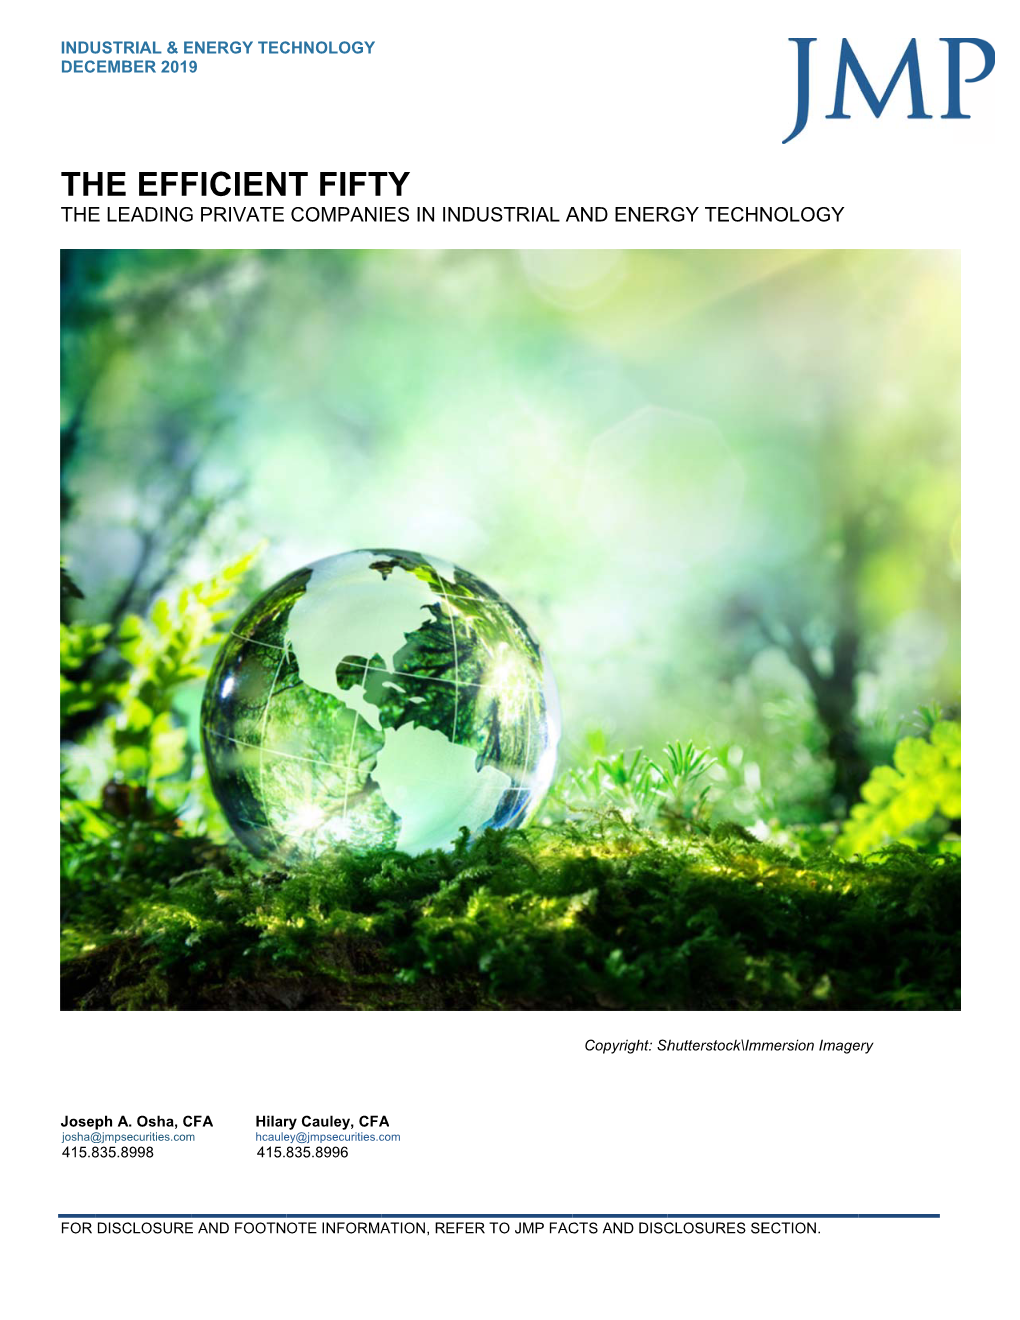 The Efficient Fifty the Leading Private Companies in Industrial and Energy Technology